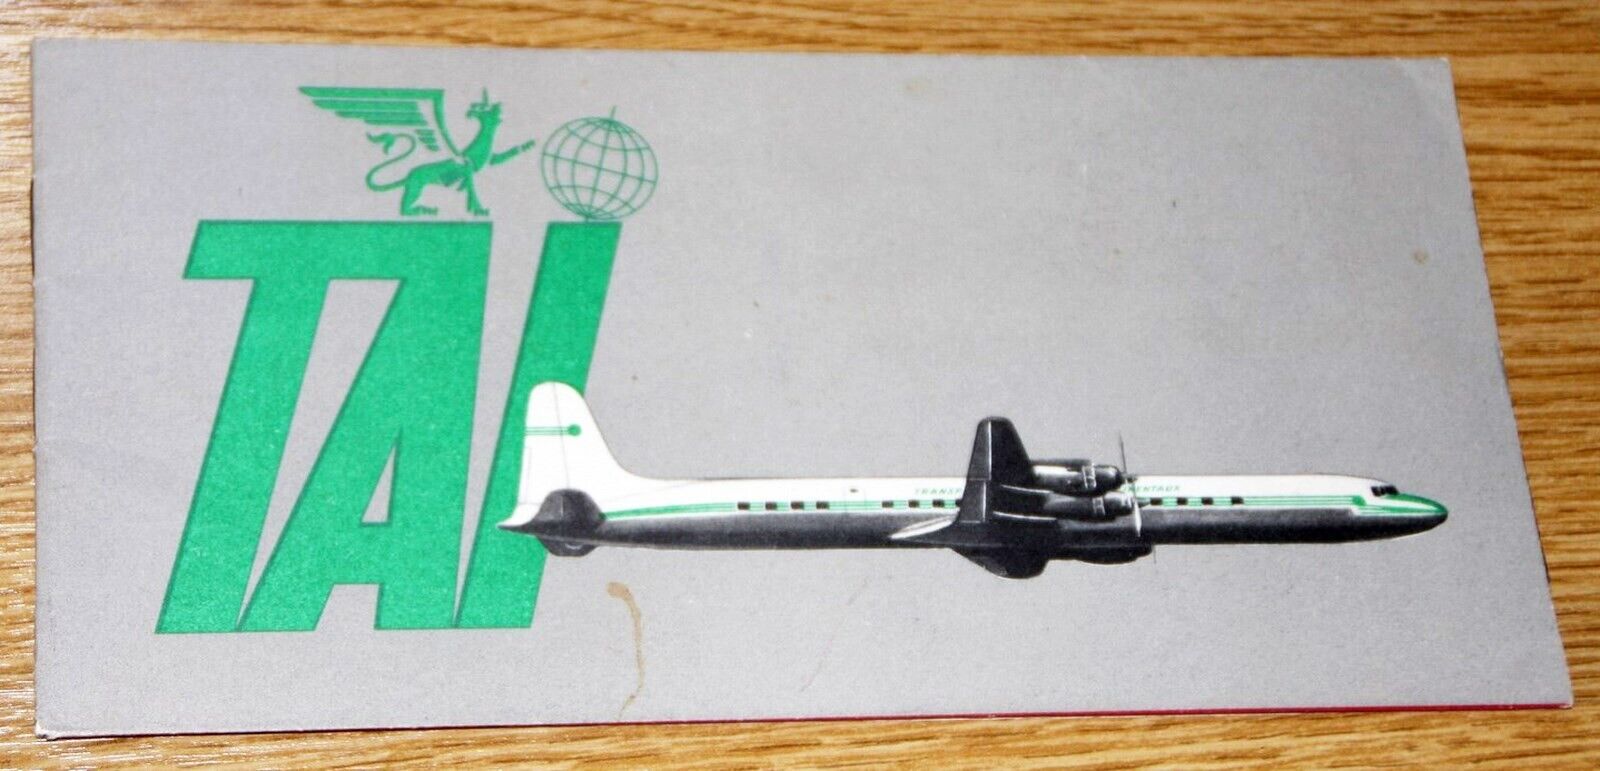 1950s T.A.I AIRLINE FRANCE BROCHURE FOR DOUGLAS DC-7C AIRCRAFT ENTRY IN SERVICE